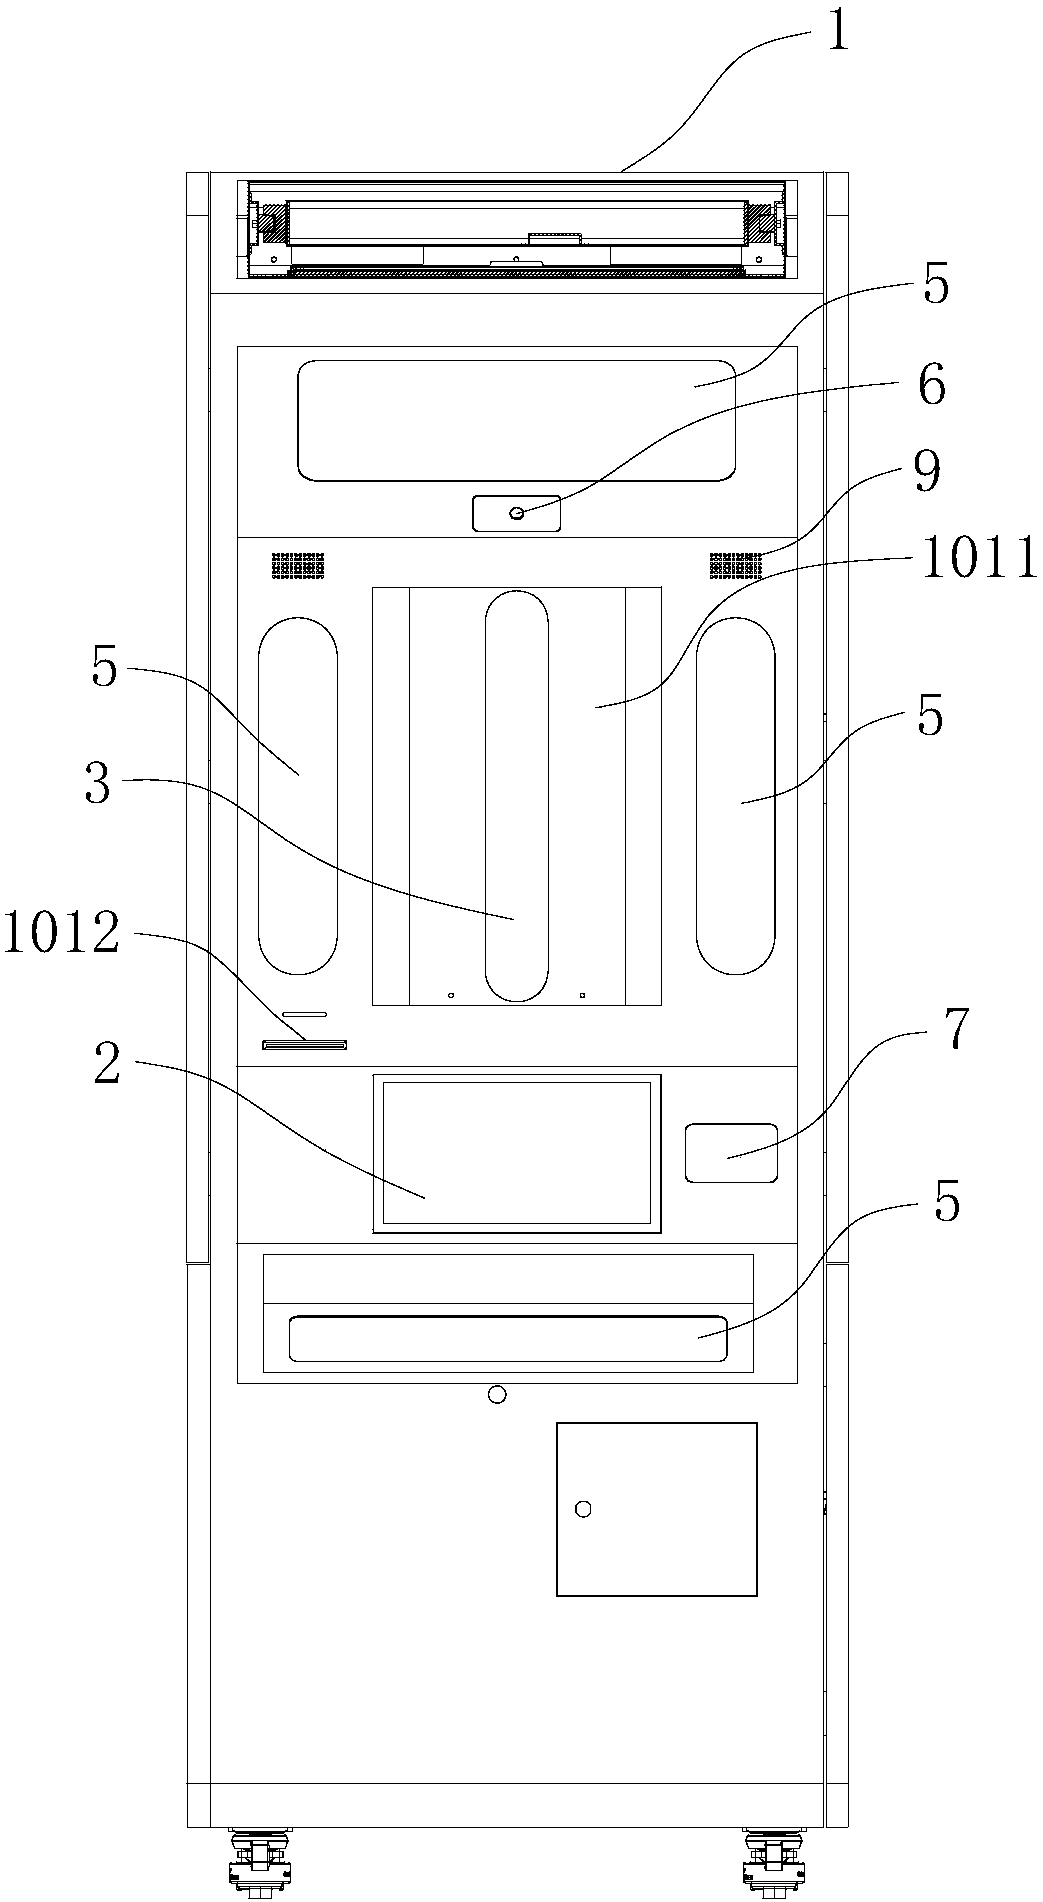 Contactless intelligent self-service license photographing equipment and method